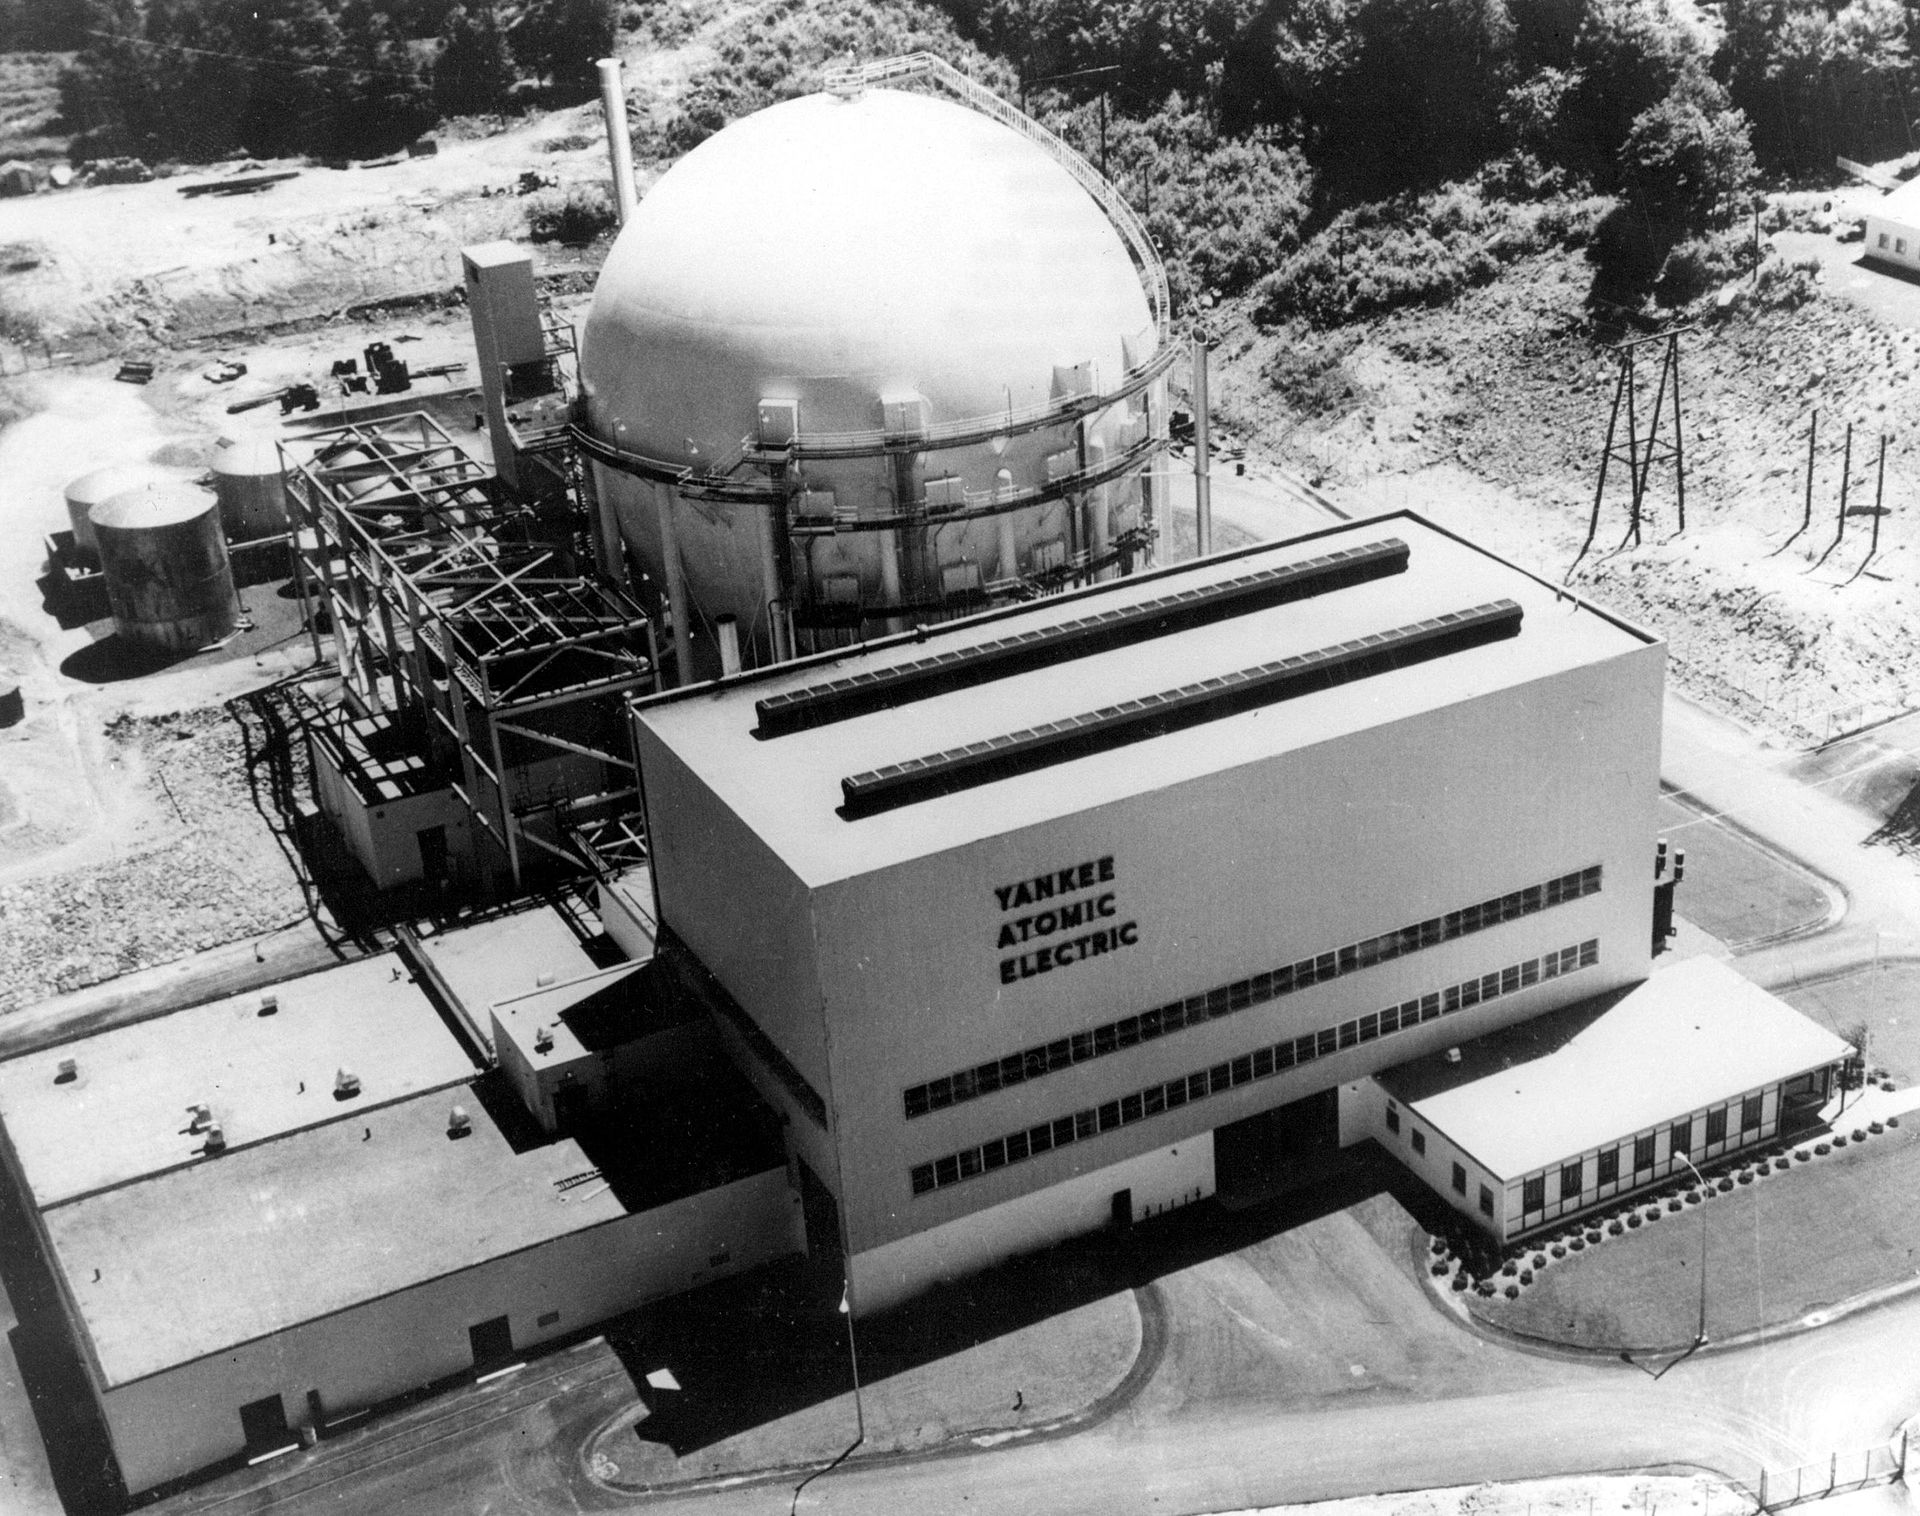 1960 – The Dresden and Yankee Rowe Nuclear Power Stations Become the First Privately Funded, Commercial Reactors